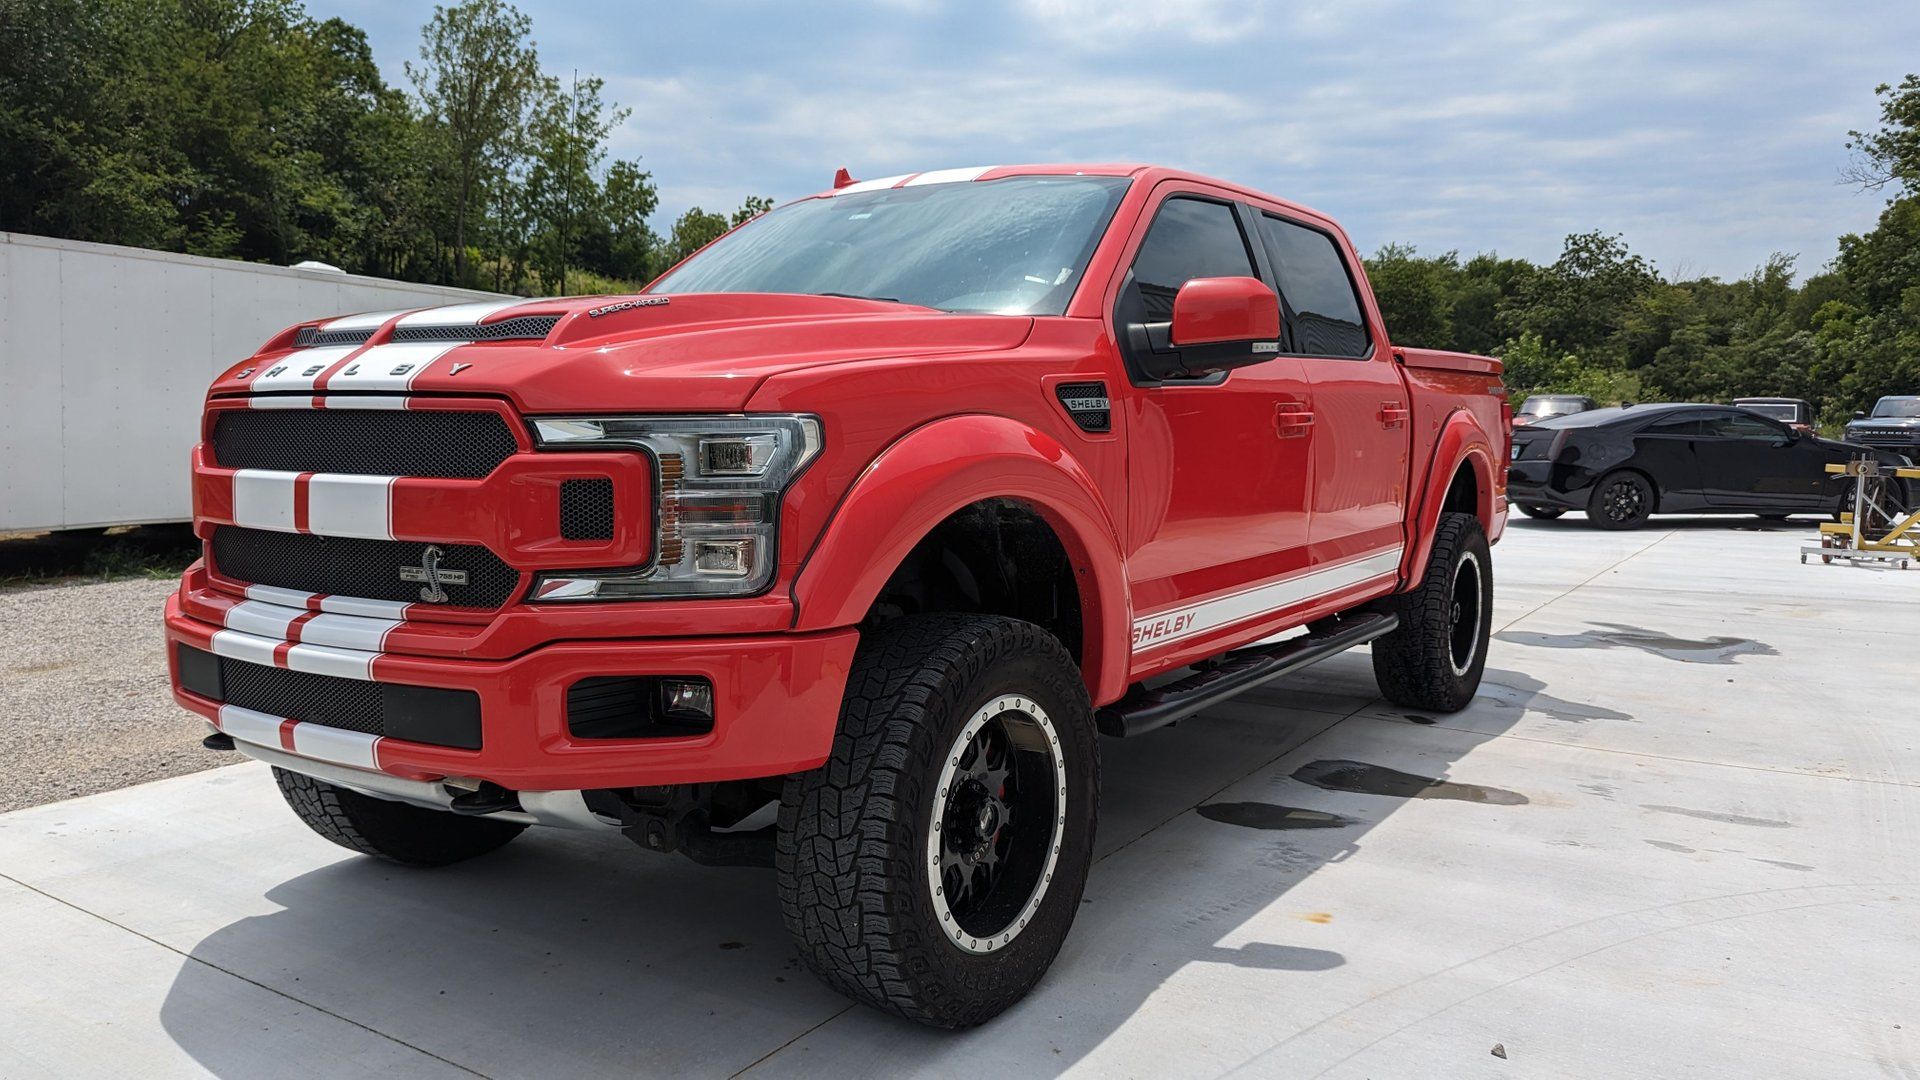 handpicked, muscle, american, news, highlights, newsletter, sports, client, classic, modern classic, europe, features, luxury, trucks, celebrity, off-road, german, maple brothers is selling a brutally fast 755 horsepower ford f-150 modified by shelby